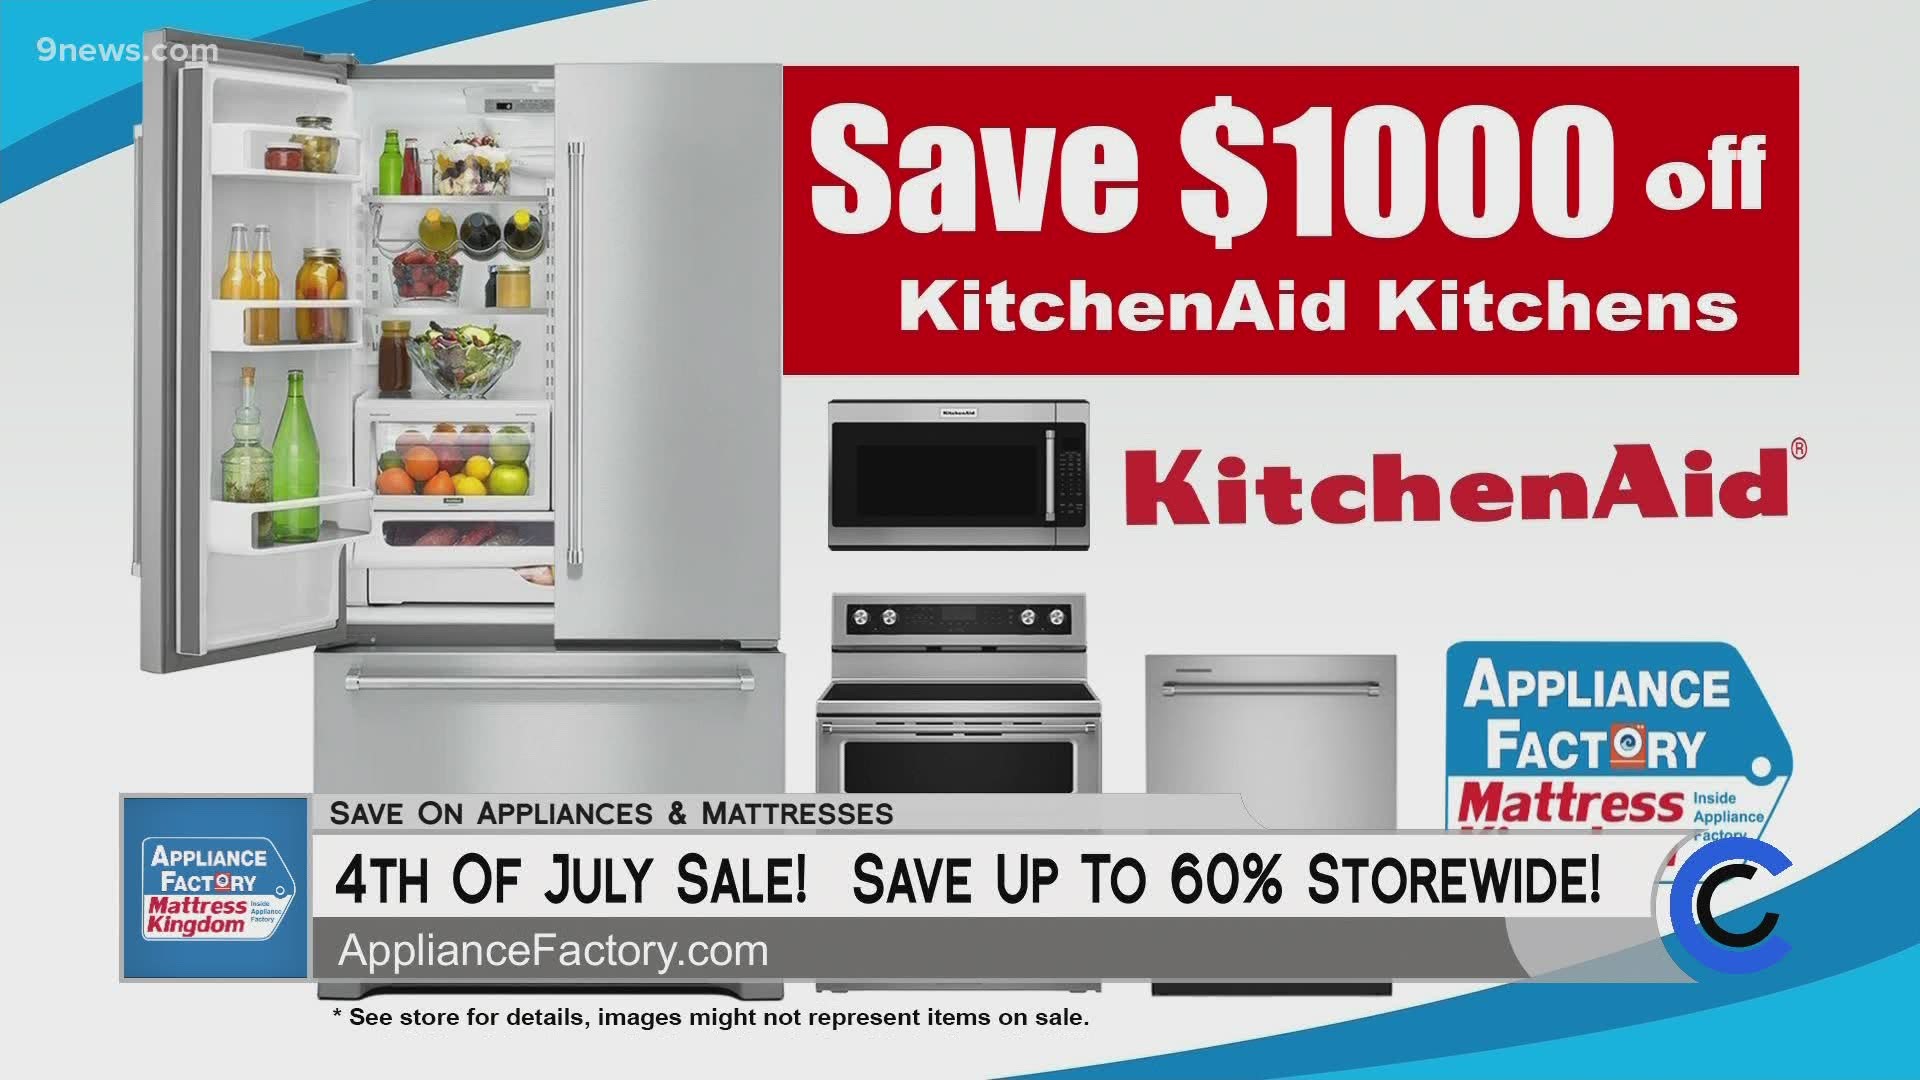 Check out all the great deals at Appliance Factory and Mattress Kingdom while shopping safely. Learn more and find a location near you at ApplianceFactory.com.